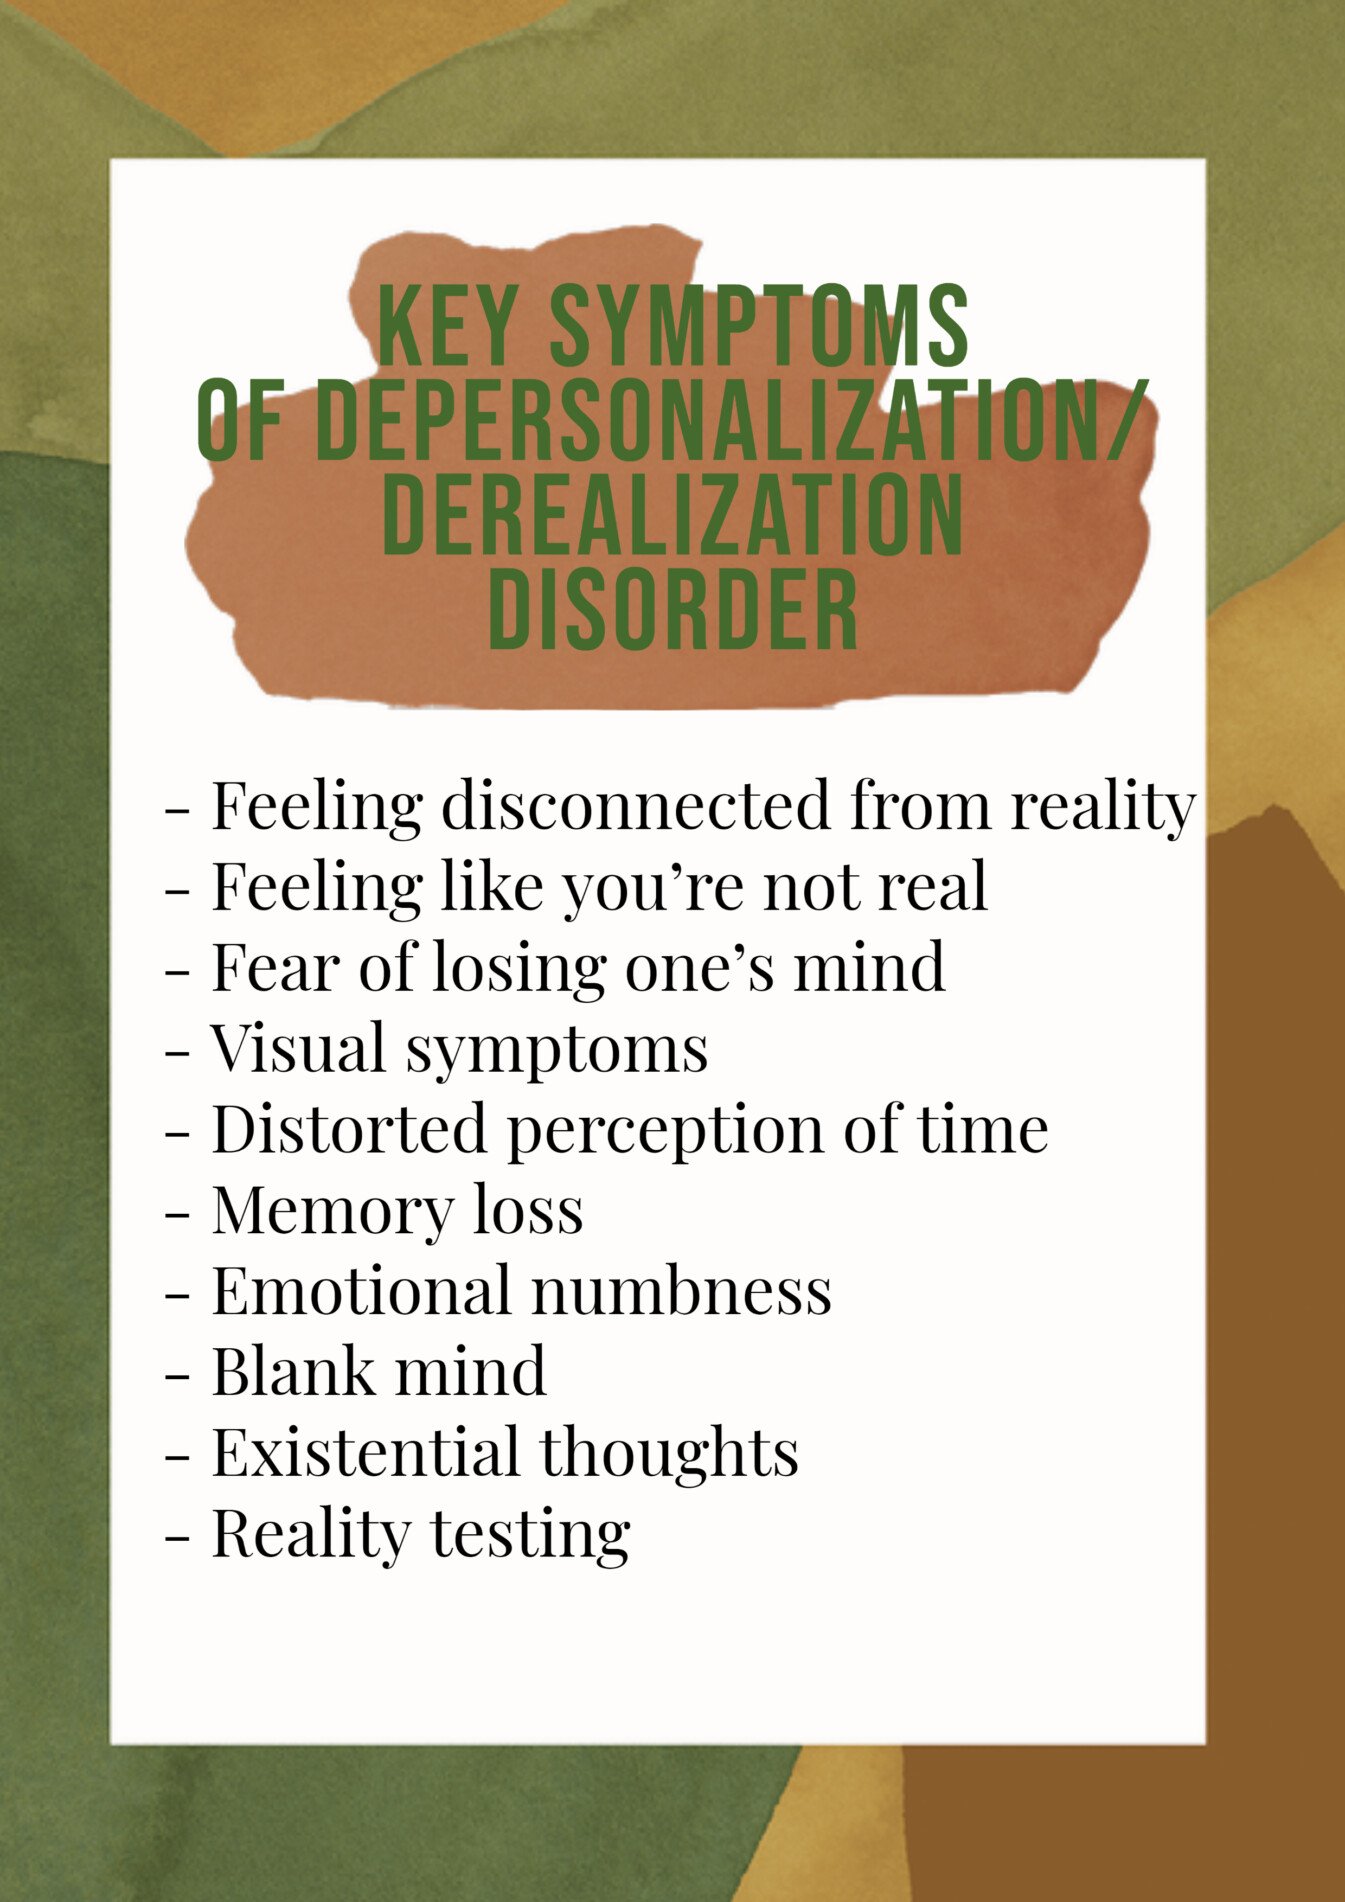 A list of some of the key symptoms of DPDR